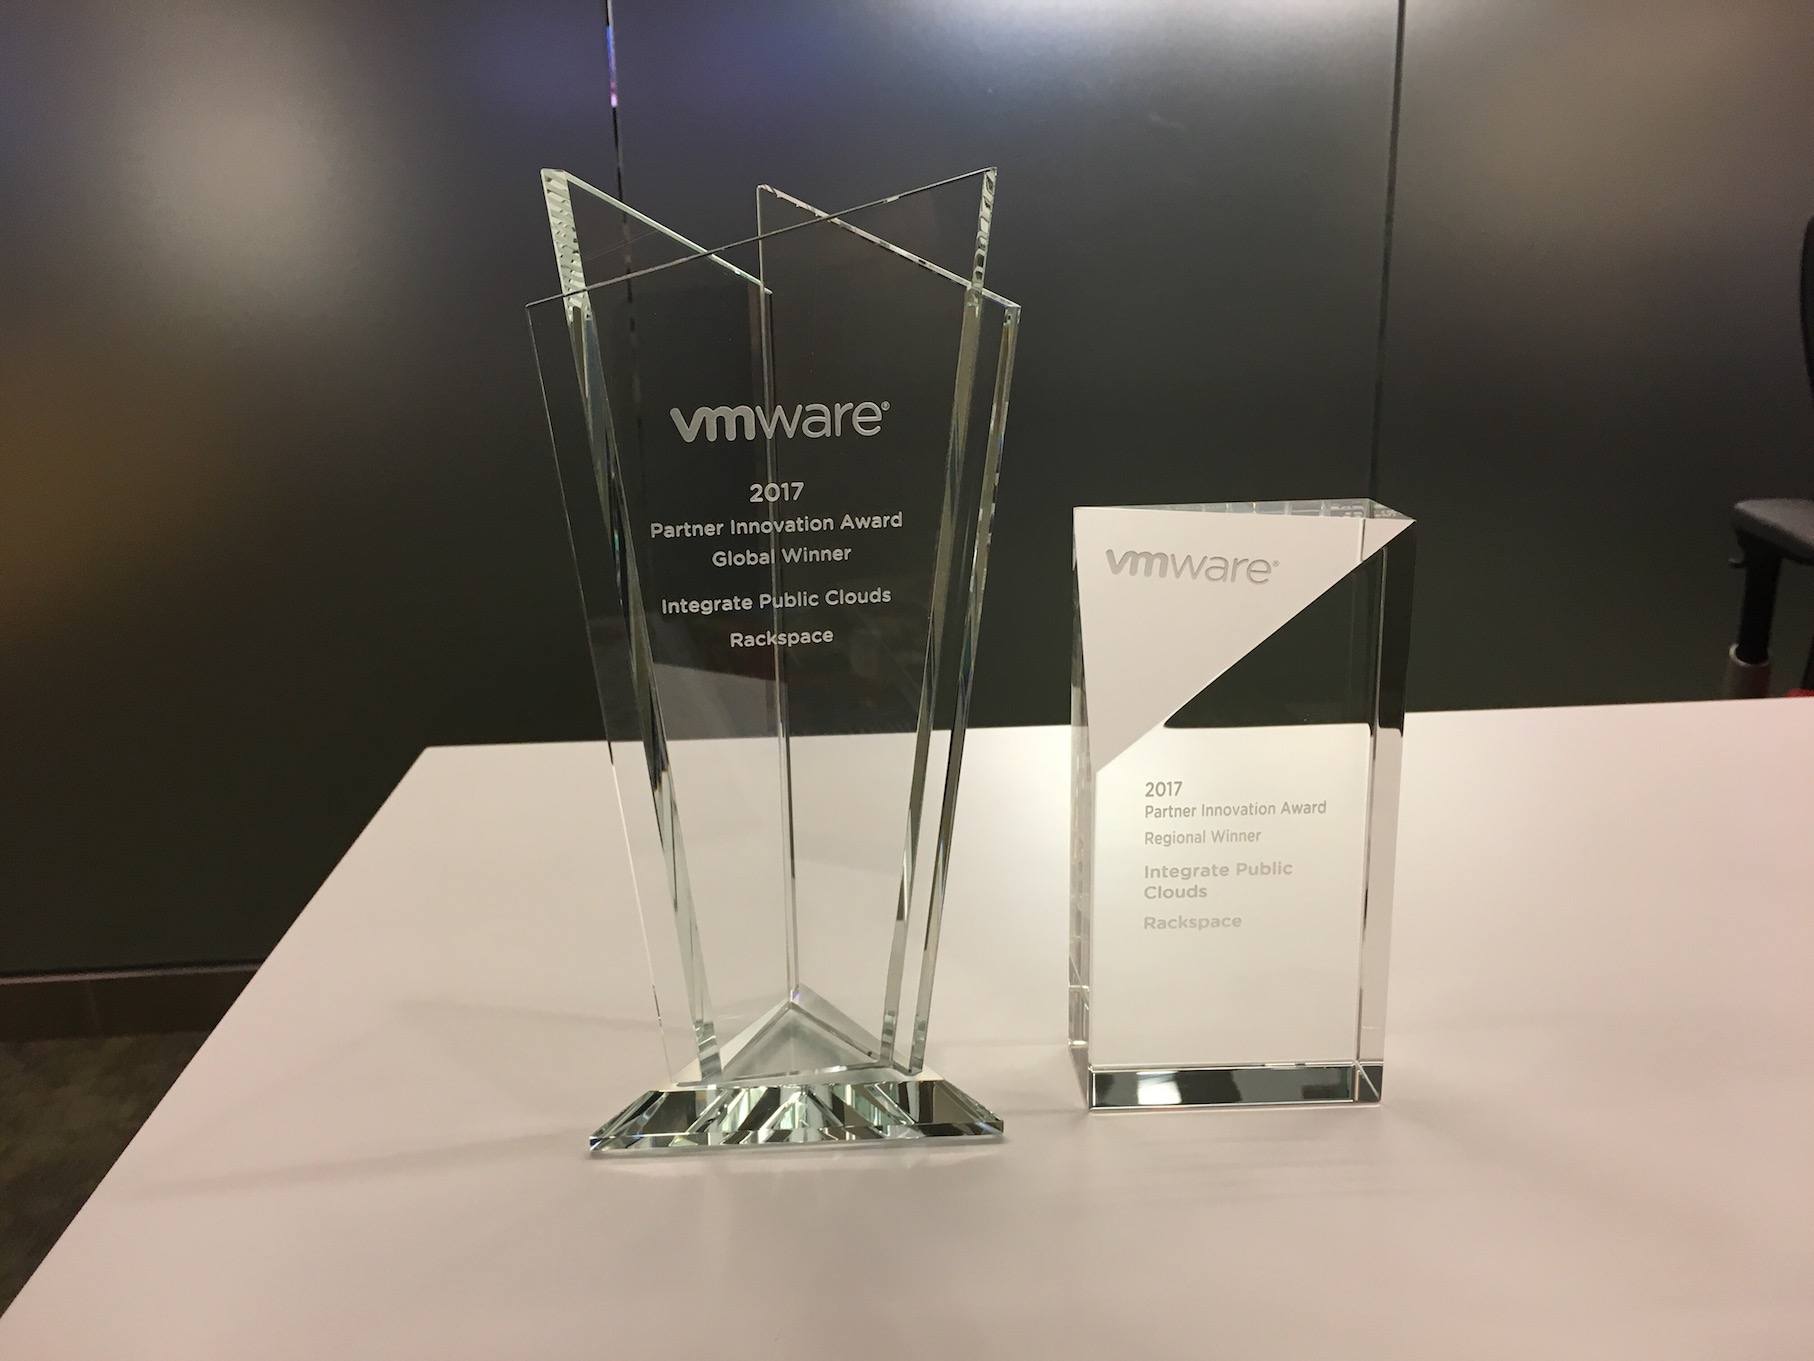 VMware Honors Rackspace for Accelerating Enterprises' Journey to the Cloud